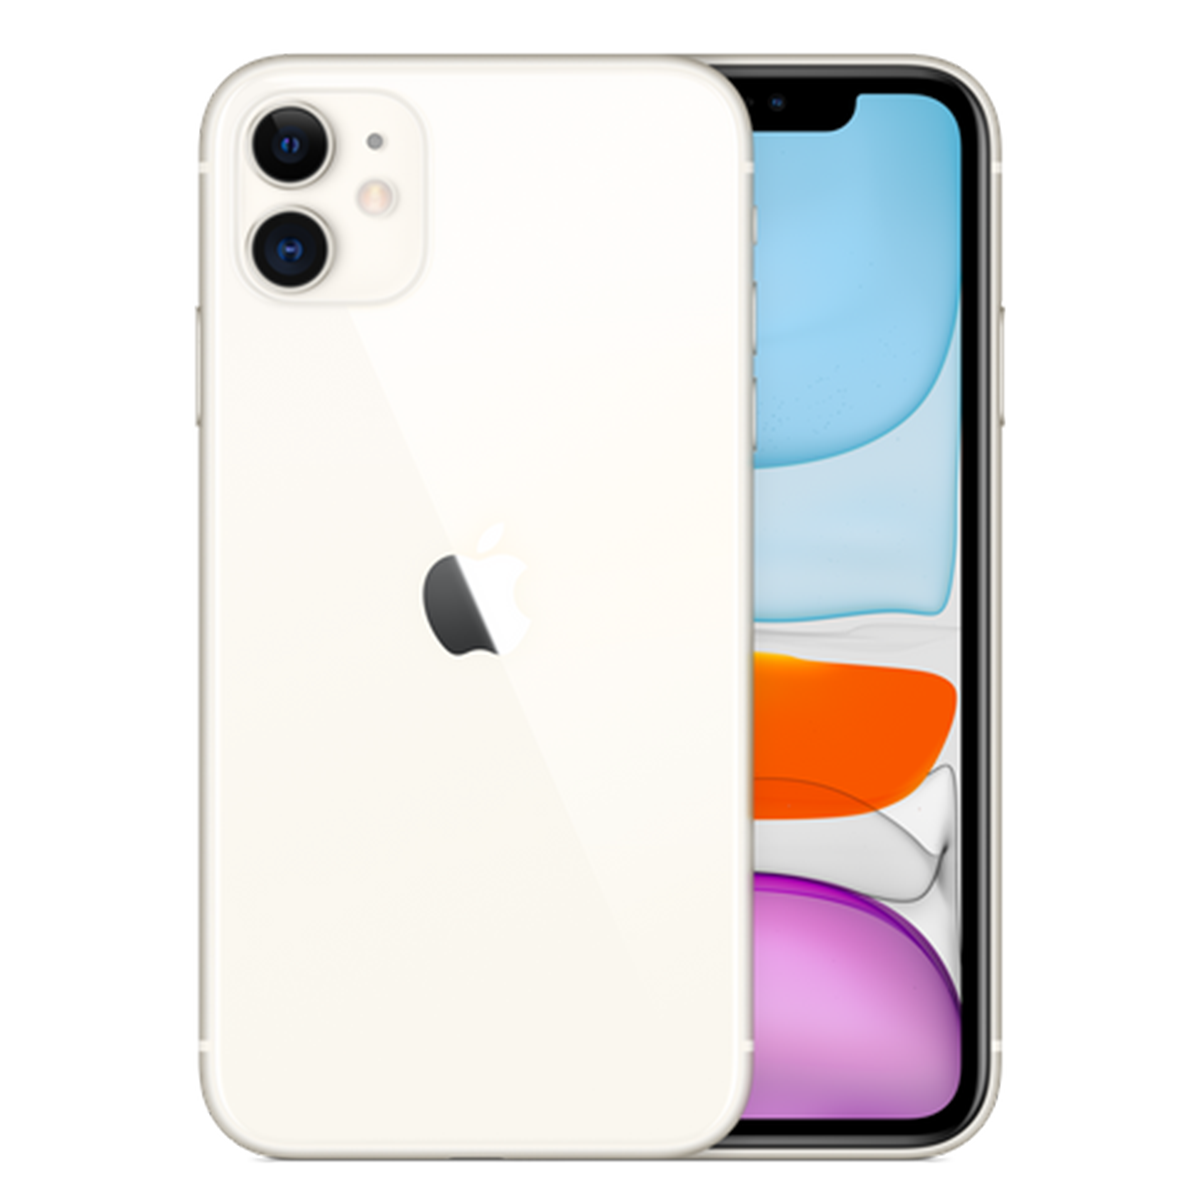 iPhone 11, White, 128GB (Official Stock)